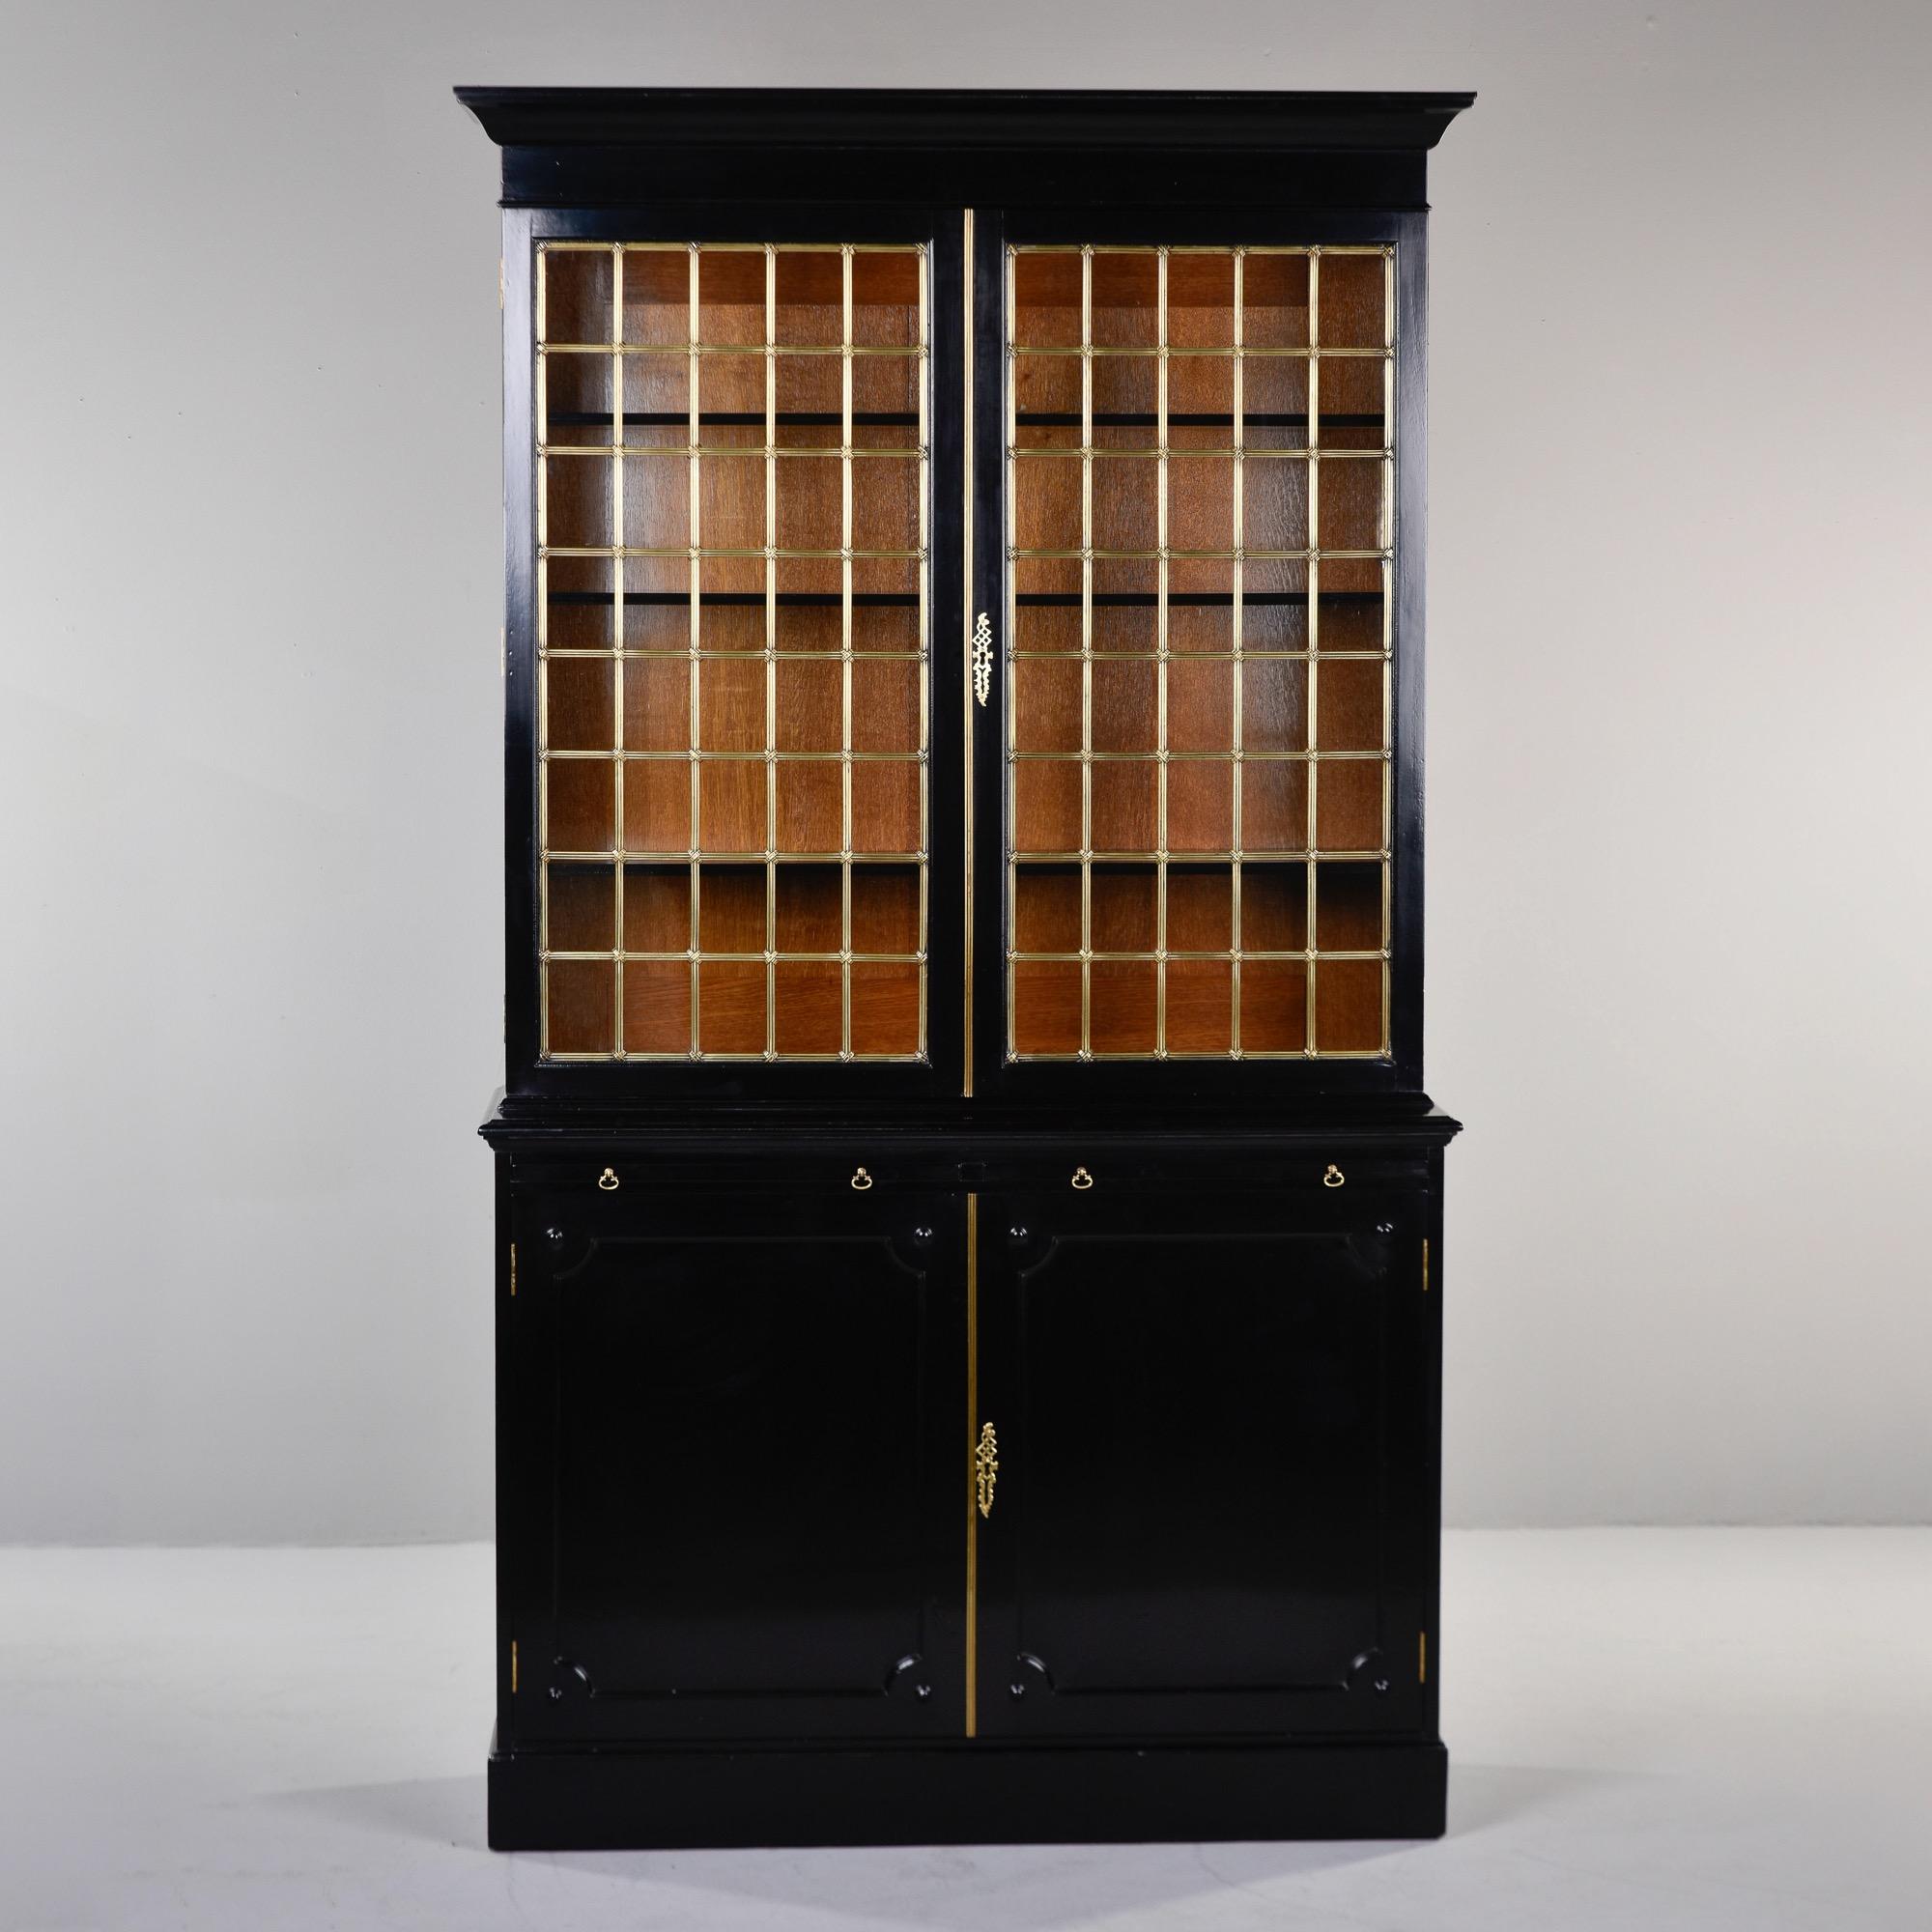 Found in England, this mahogany bookcase cabinet dates from approximately 1900. We had the piece ebonised in England by professionals and left the interiors in the original stained mahogany finish for contrast. The top section can be removed from